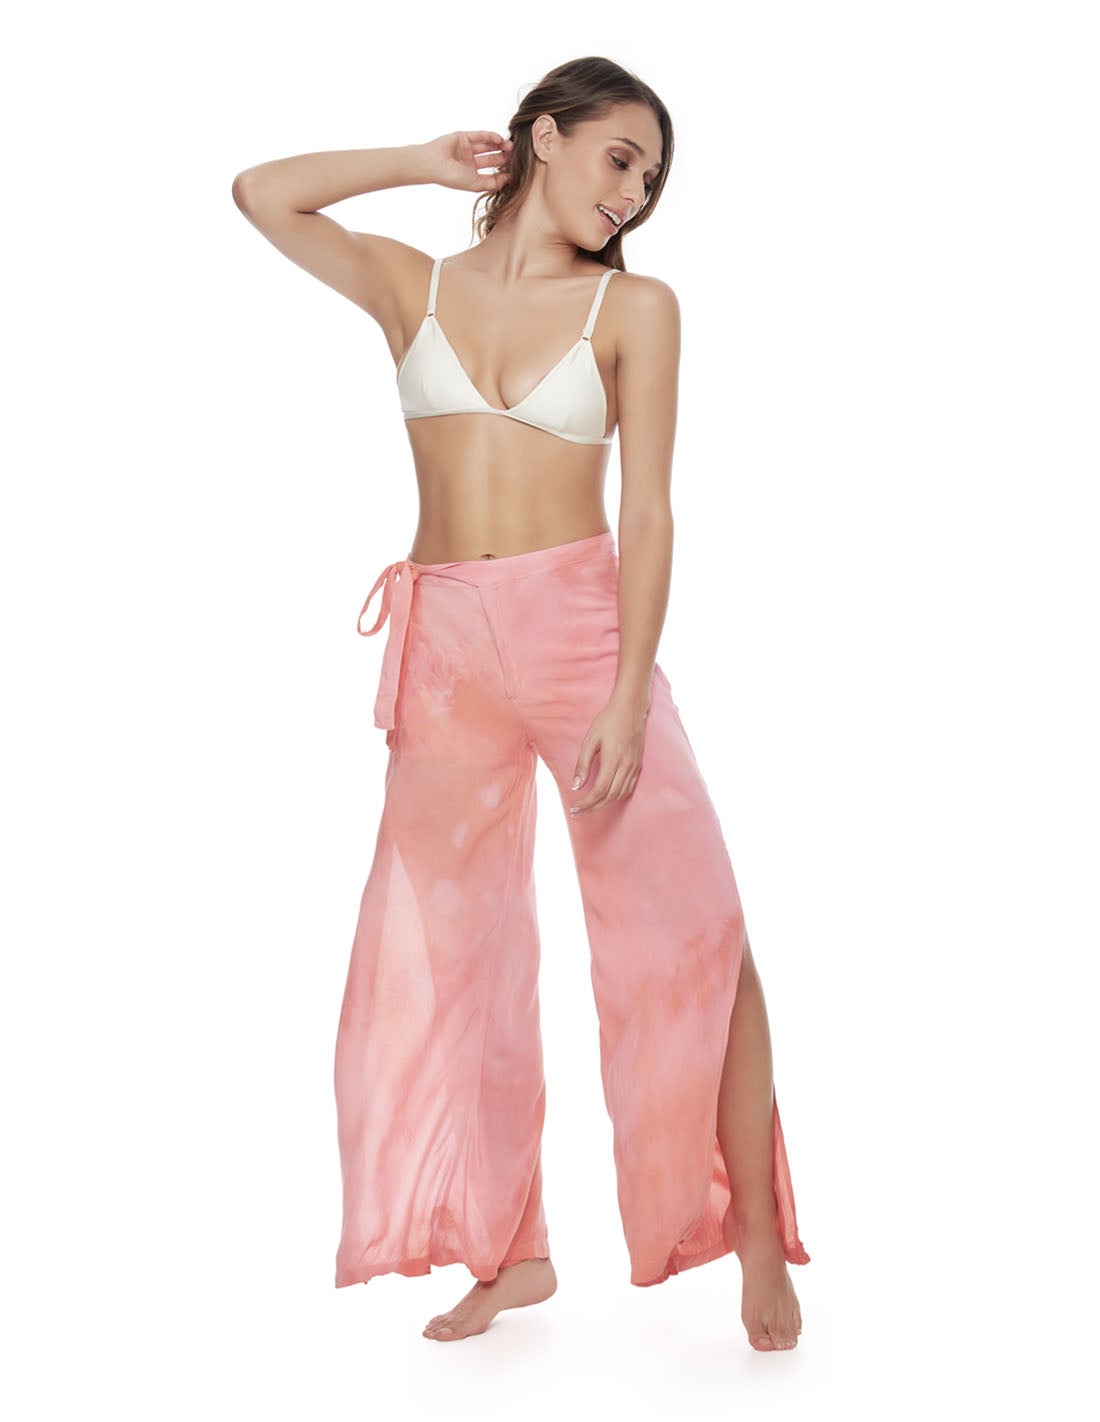 Earth Pant Heart Rose. Hand-Dyed Beach Pant In Heart Rose. Entreaguas